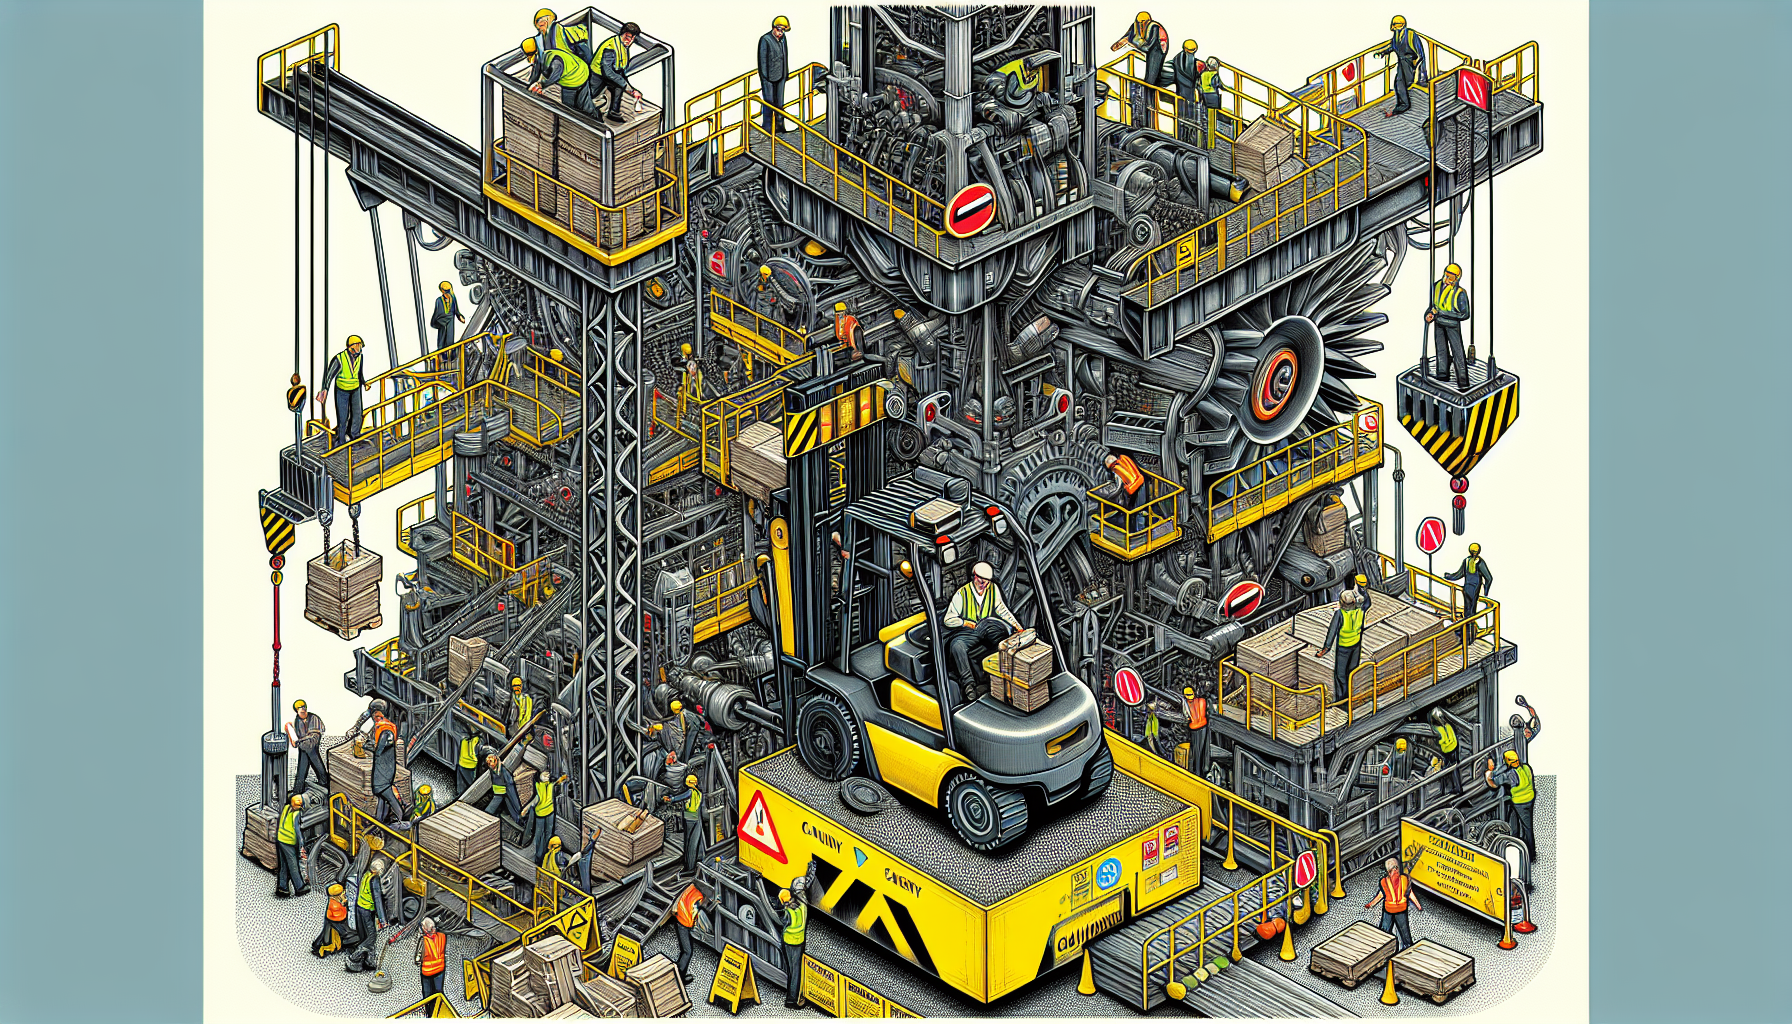 Illustration of heavy machinery at a manufacturing plant